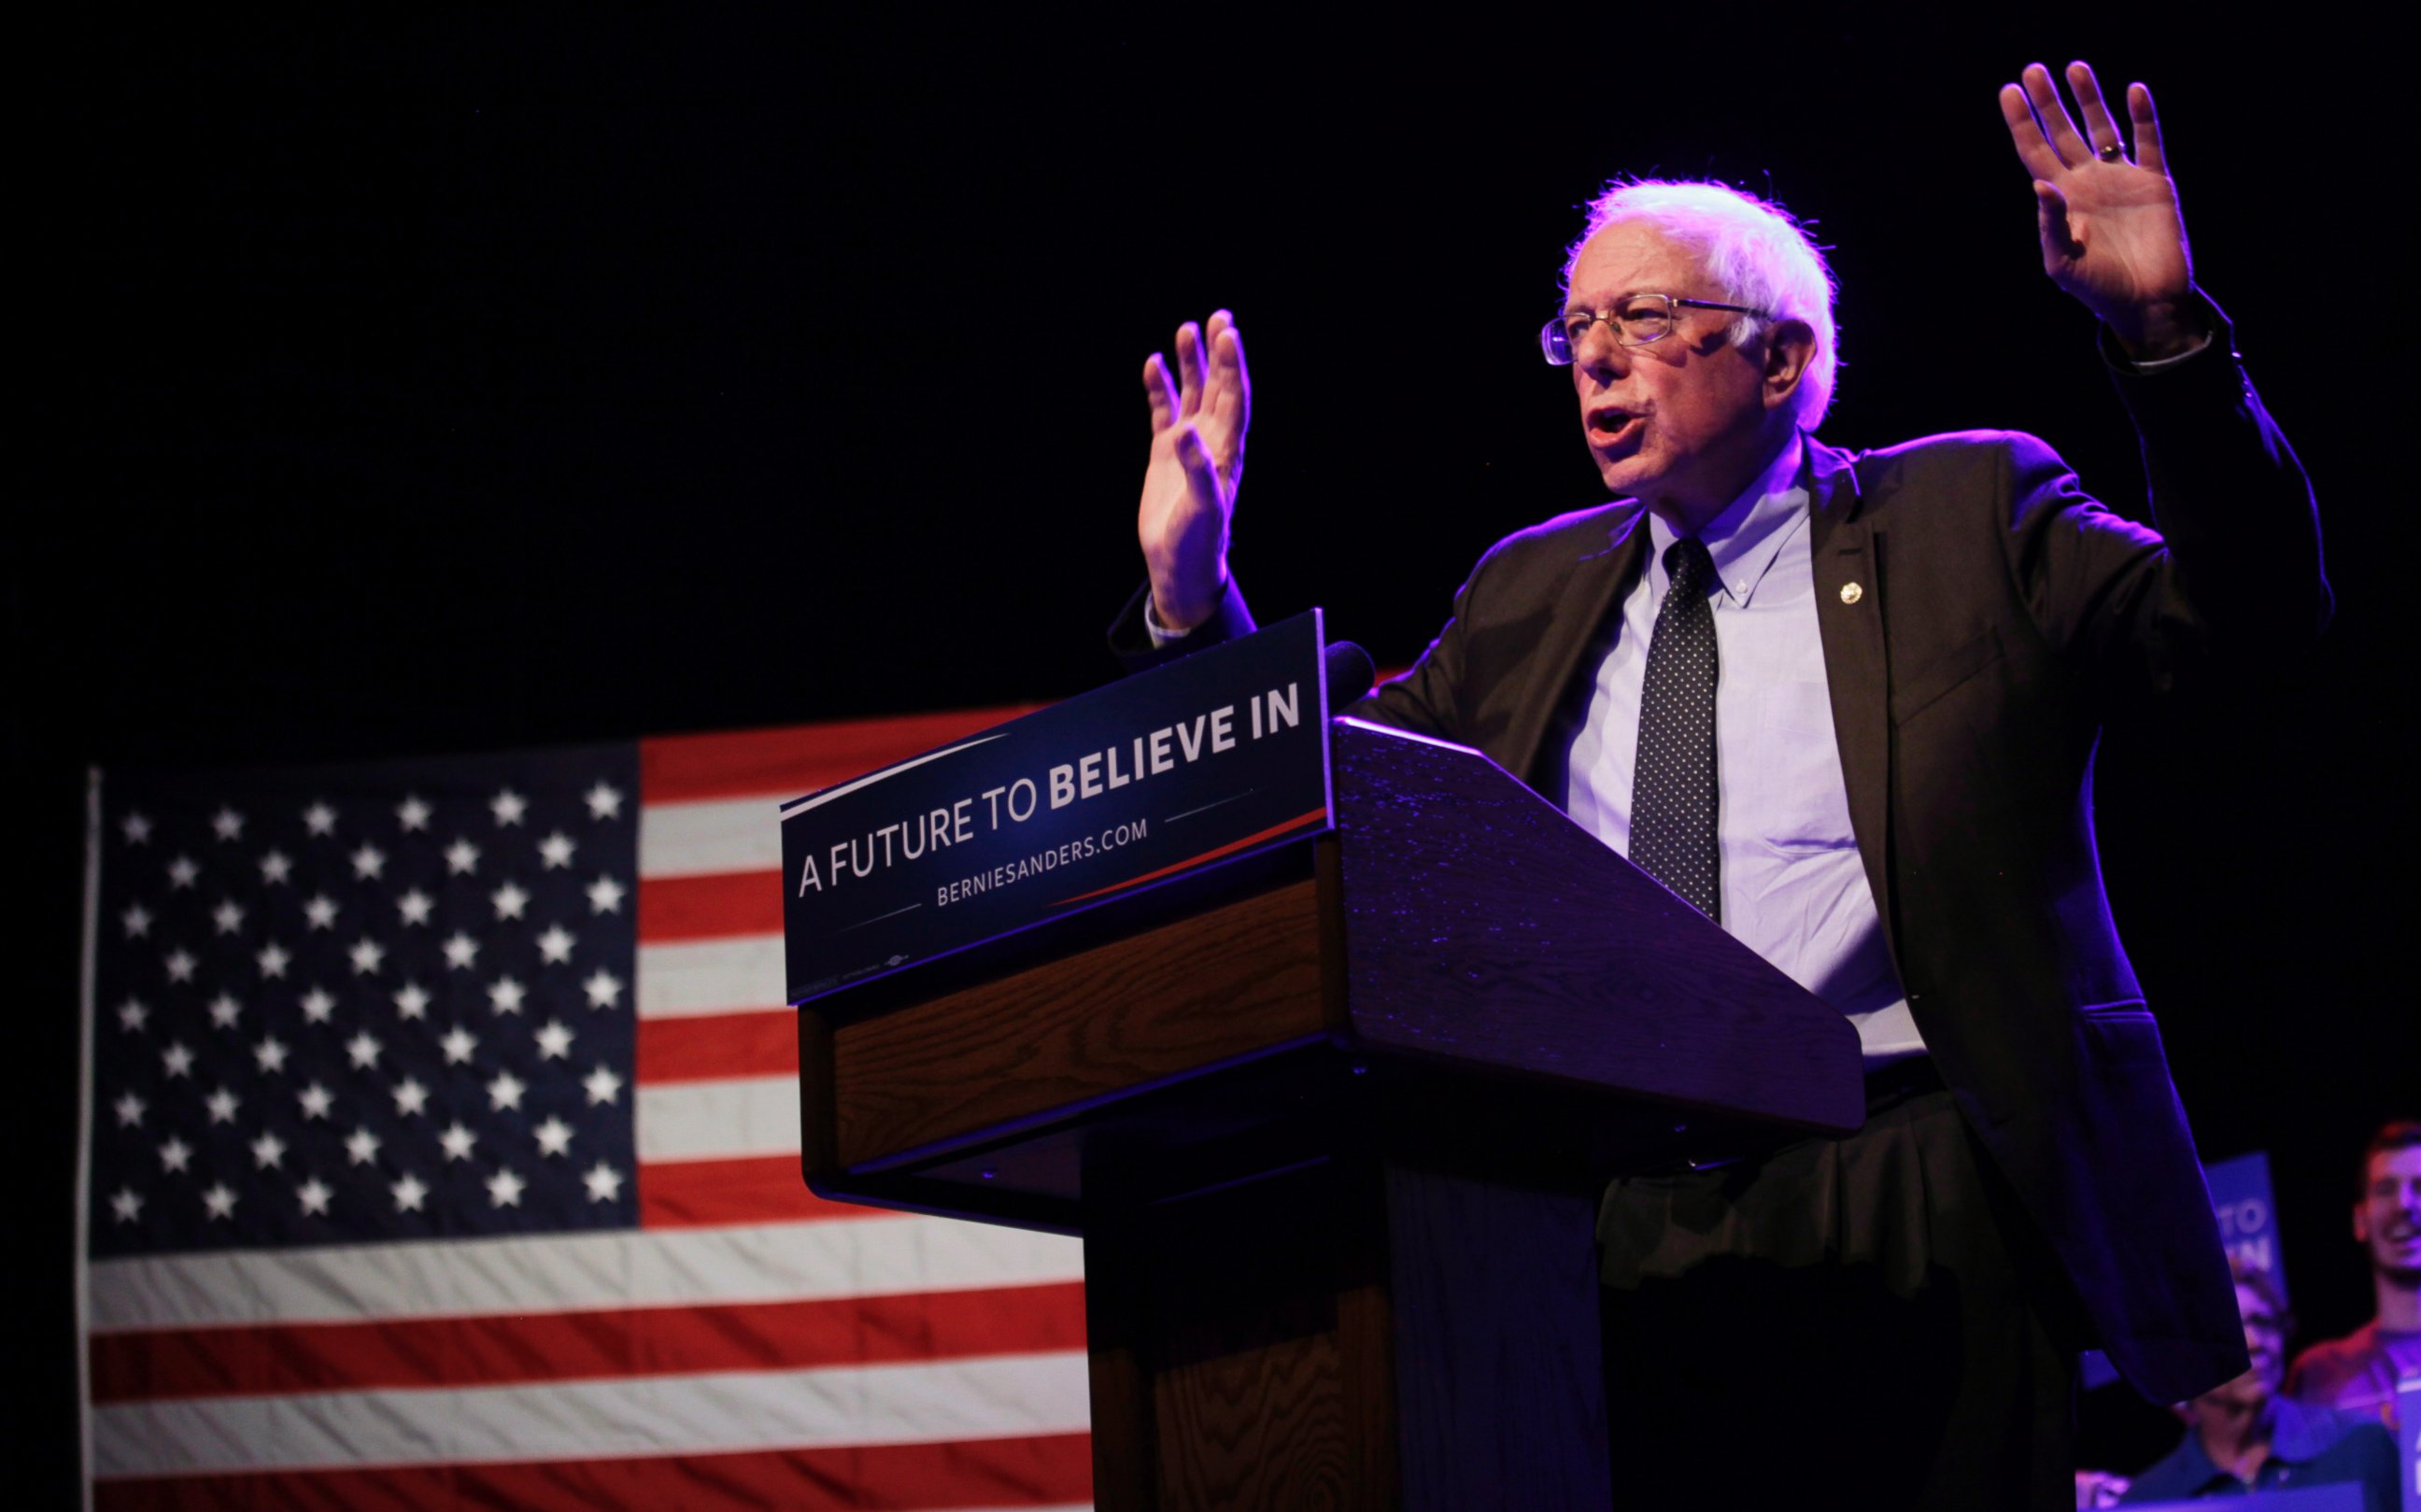 PHOTO: Bernie Sanders speaks at a event,  March 30, 2016, in Madison, Wisconsin. Candidates are campaigning in Wisconsin ahead of the state's April 5th primary.